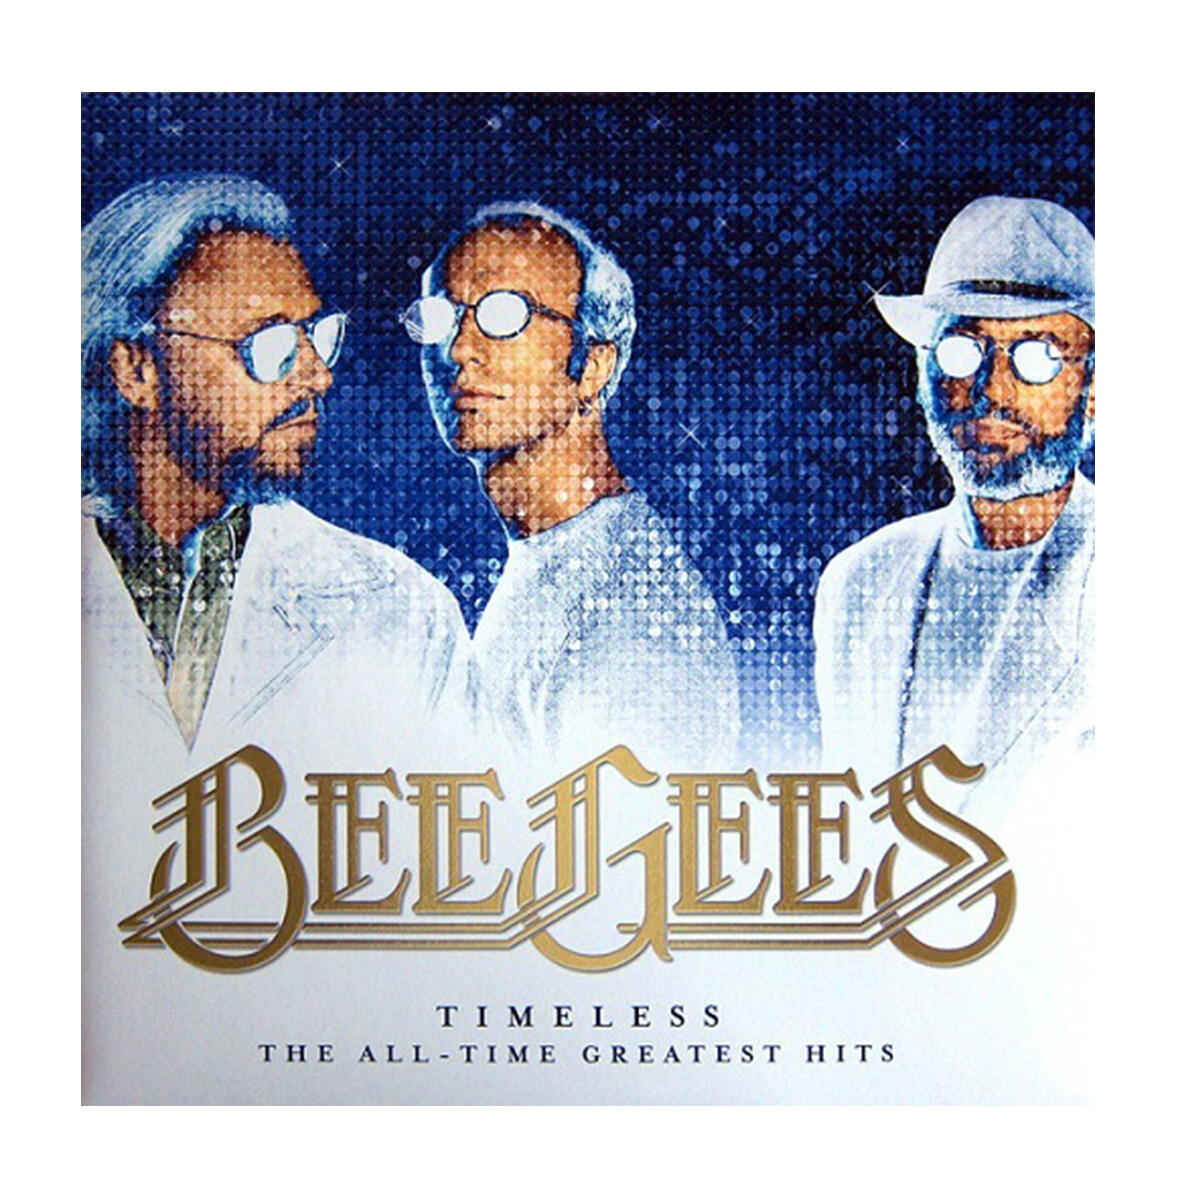 Bee Gees- Timeless - The All-time Greatest Hits - Vinilo 